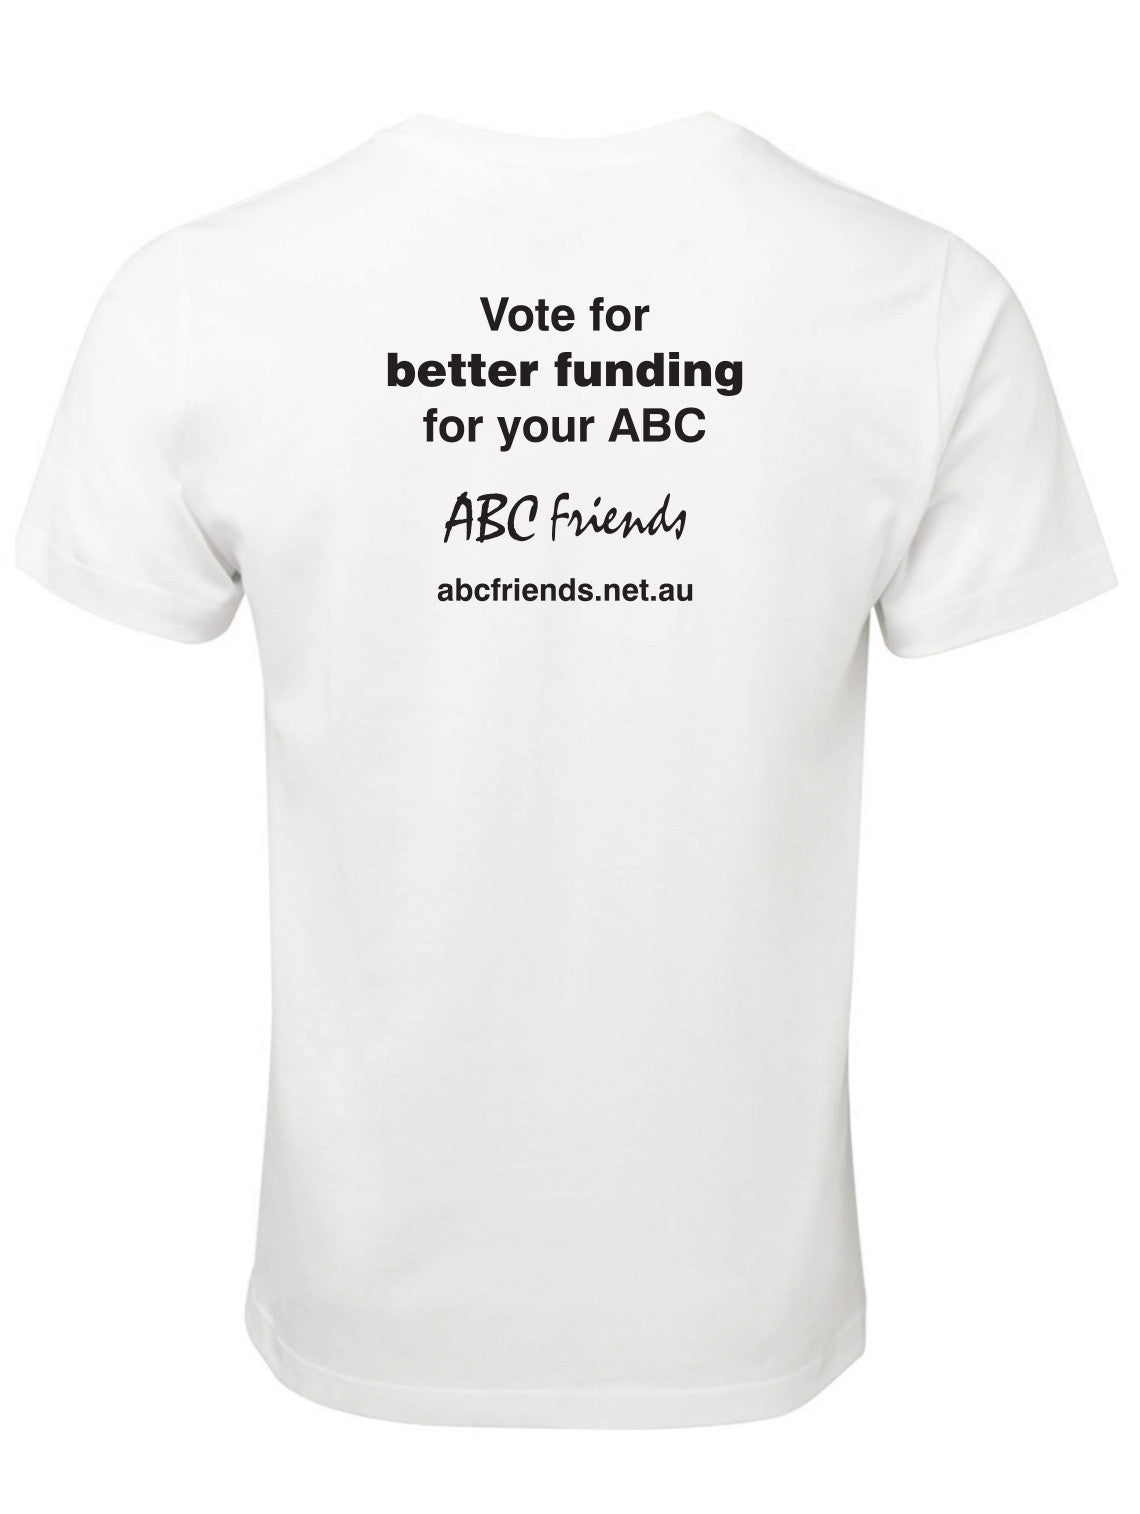 T-Shirt: The ABC deserves better than an election bandaid